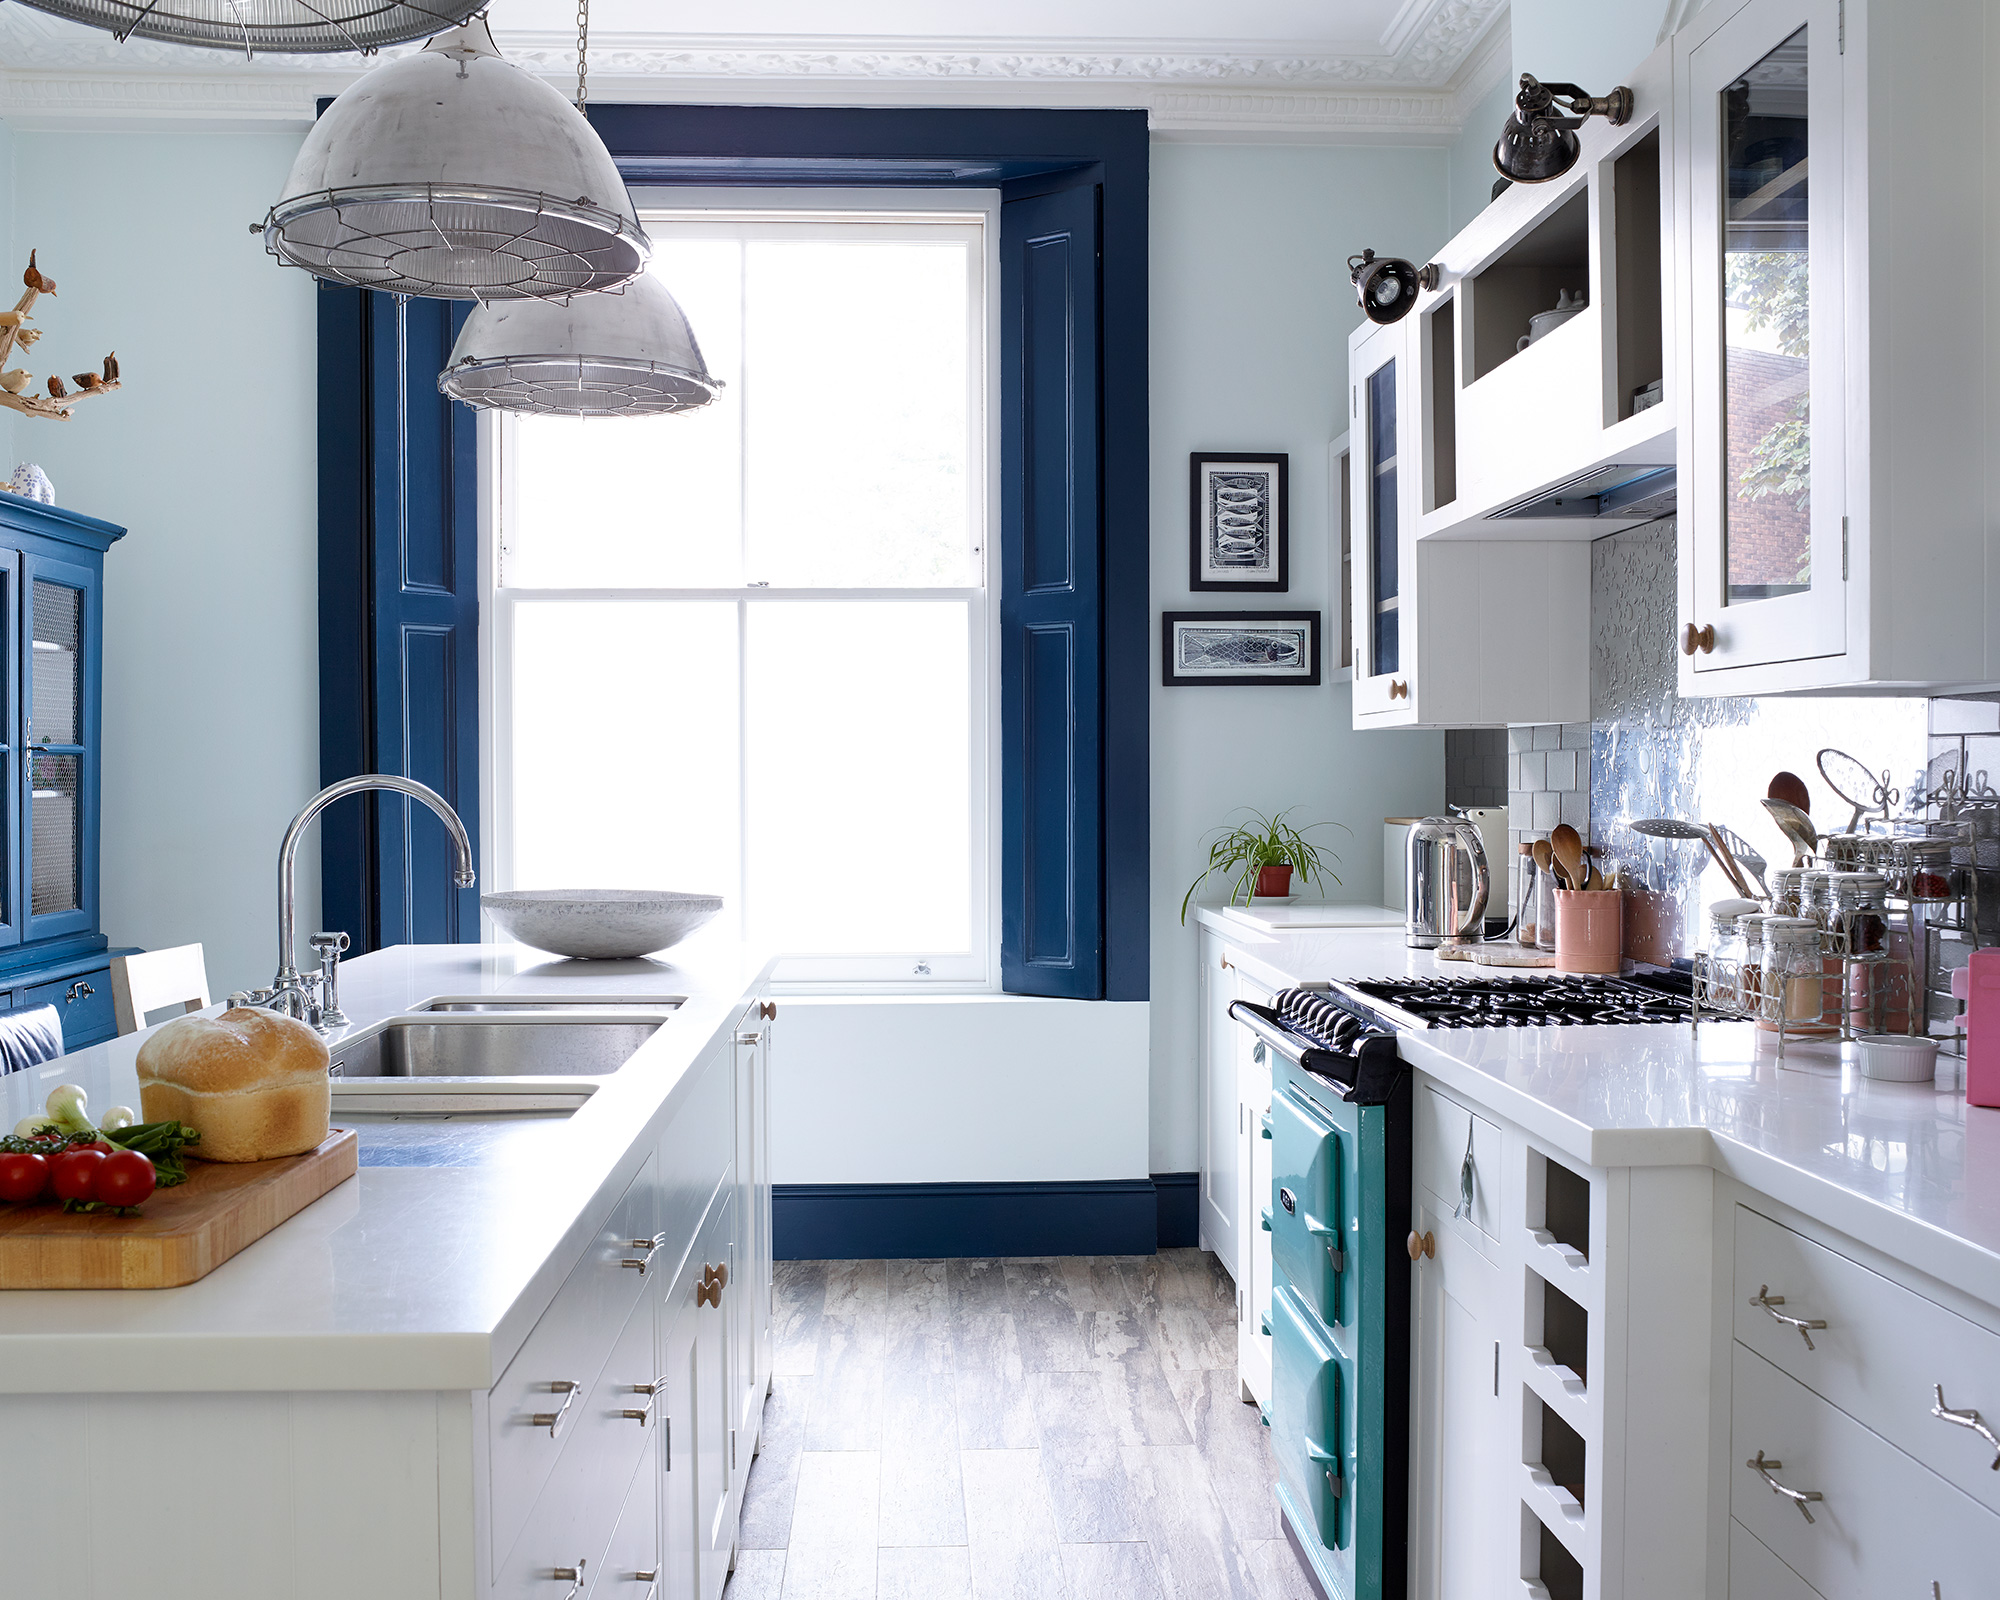 From Cluttered to Organized: Maximizing Space with Smart Kitchen Cabinets